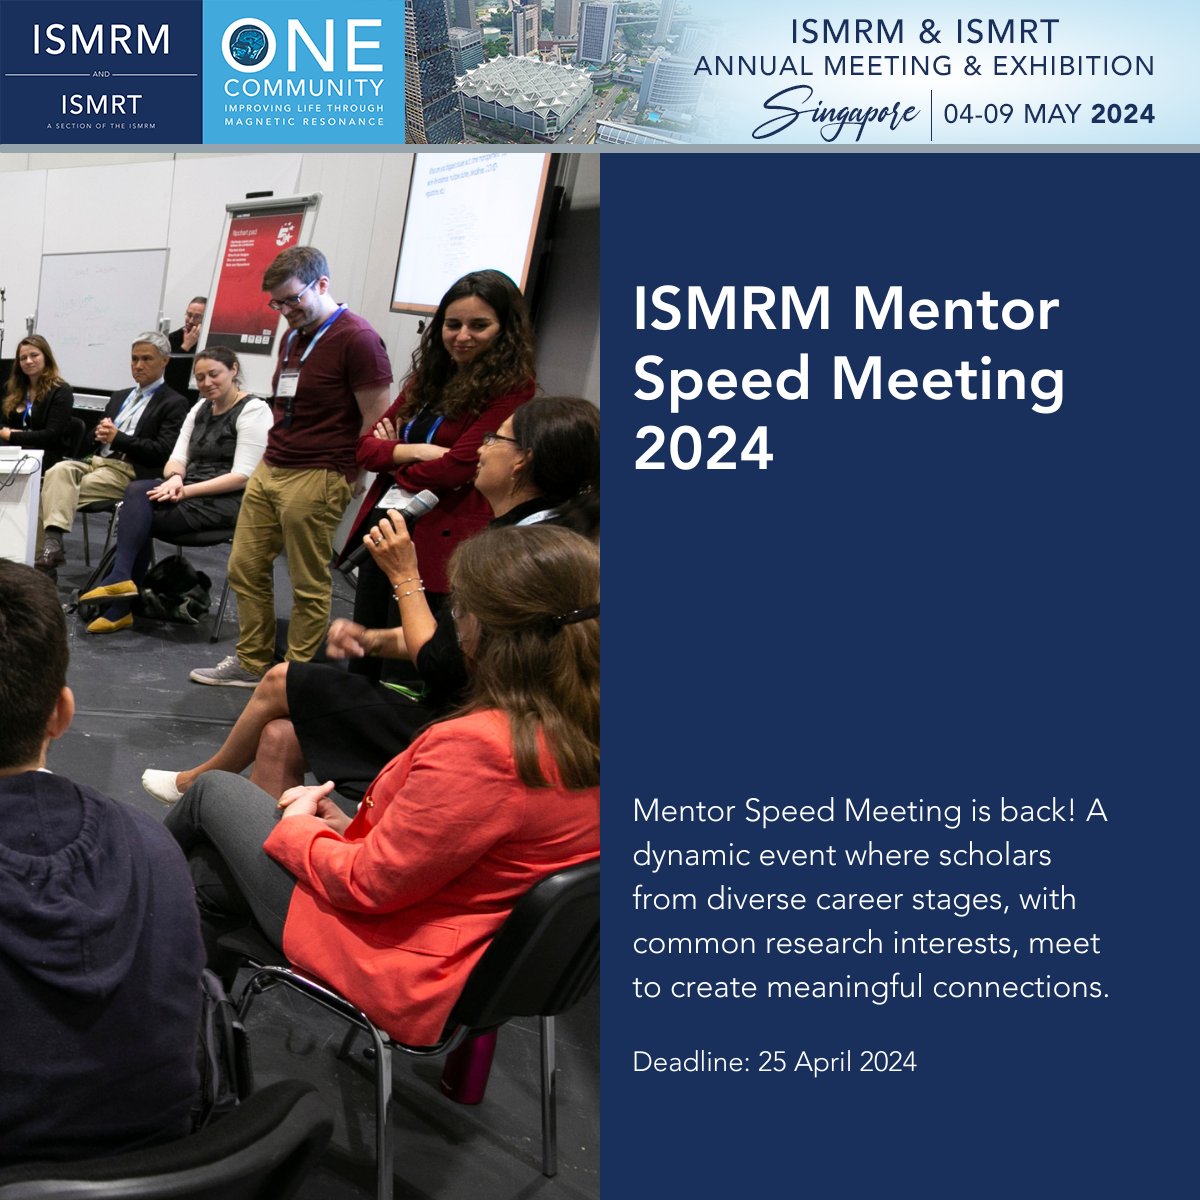 Mentor Speed Meeting is back! The Secret Sessions offer a networking opportunity where participants engage in a series of seven-minute conversations with five mentors meticulously selected to match their interests. Register today! ow.ly/IcY650R8J4I #ISMRM2024 #ISMRM